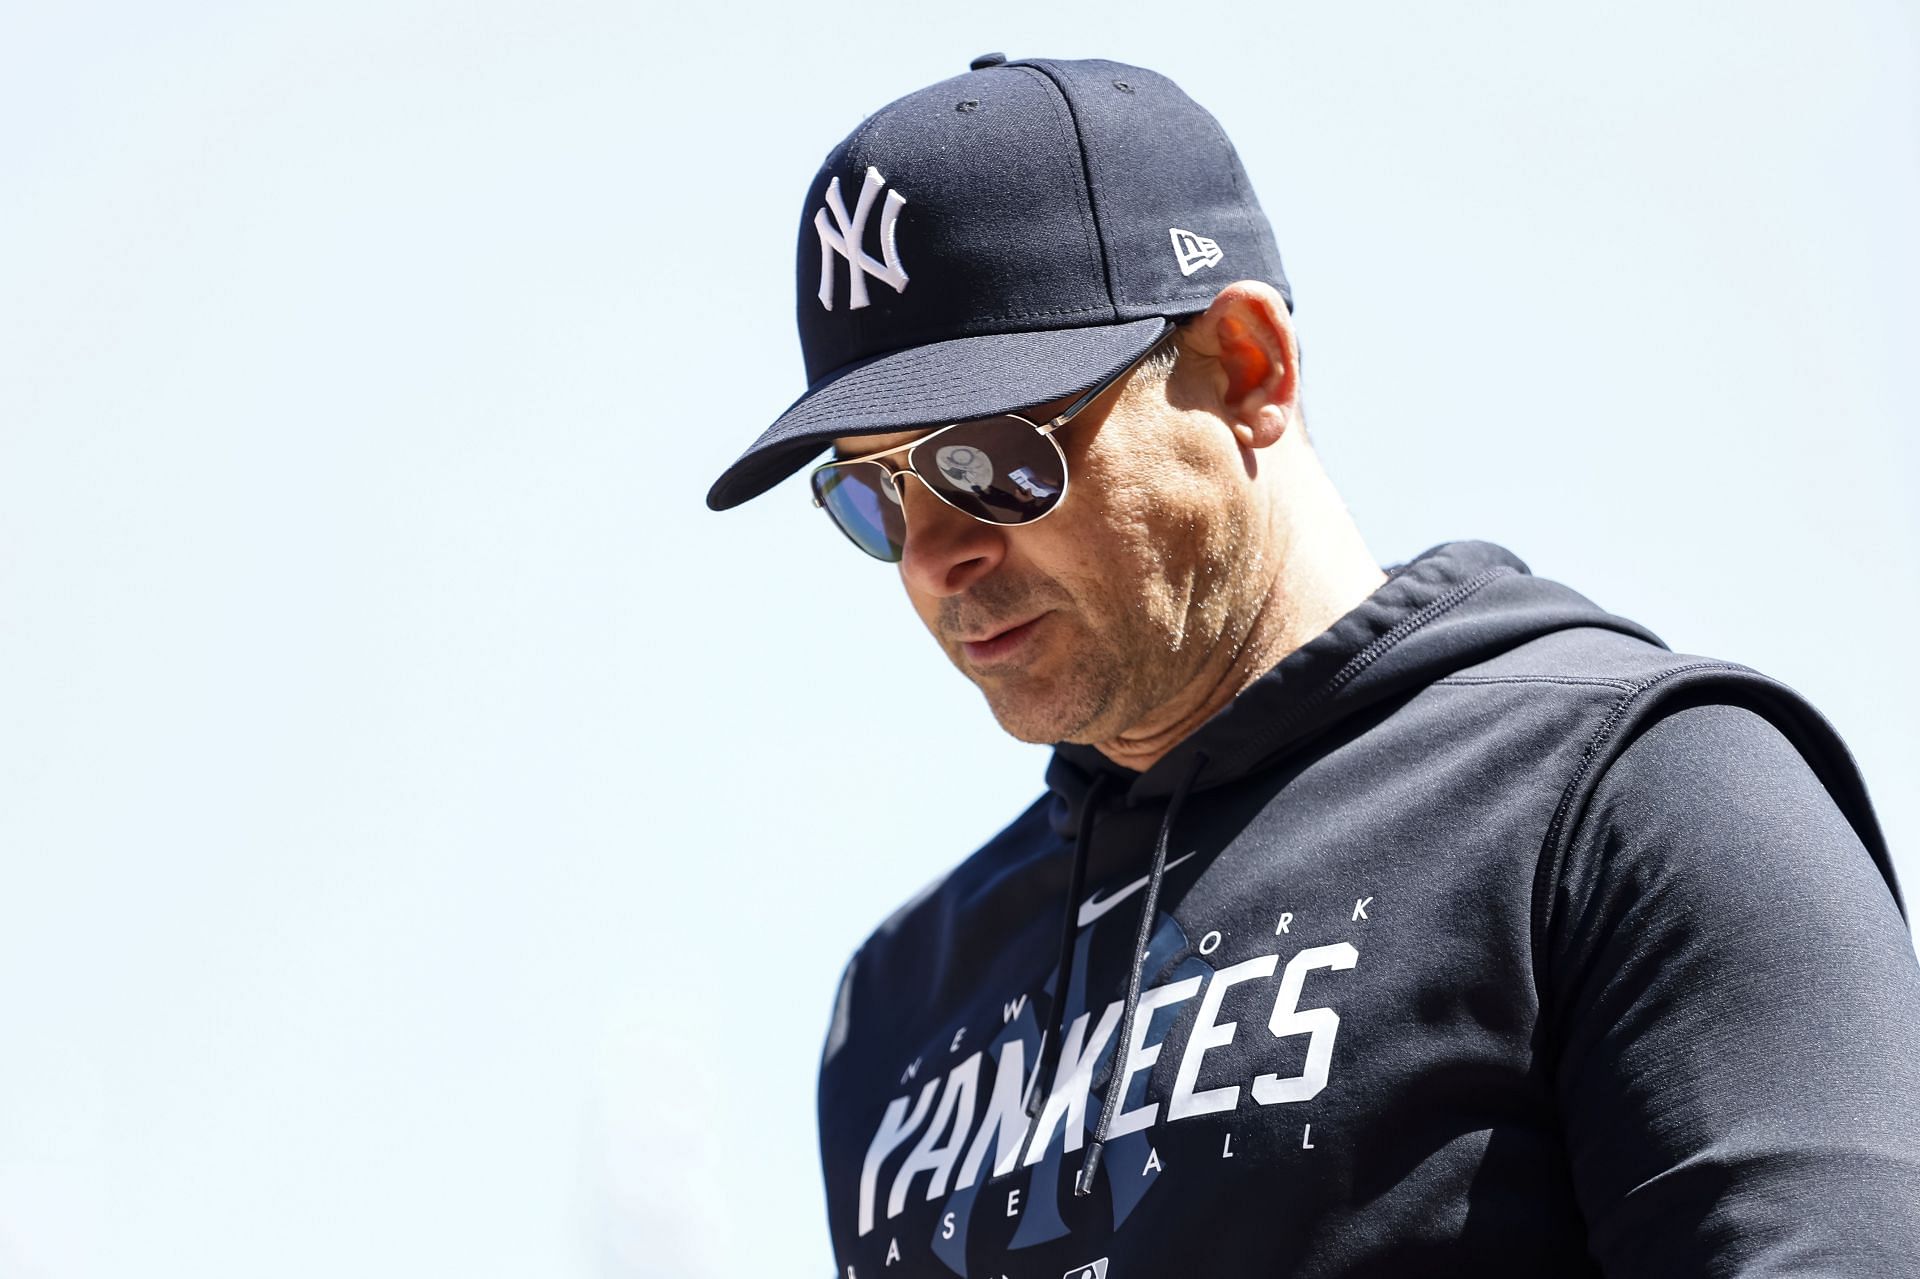 Aaron Boone #17 of the New York Yankees looks on against the Minnesota Twins in the ninth inning at Target Field on April 26, 2023 in Minneapolis, Minnesota. The Yankees defeated the Twins 12-6. (Photo by David Berding/Getty Images)